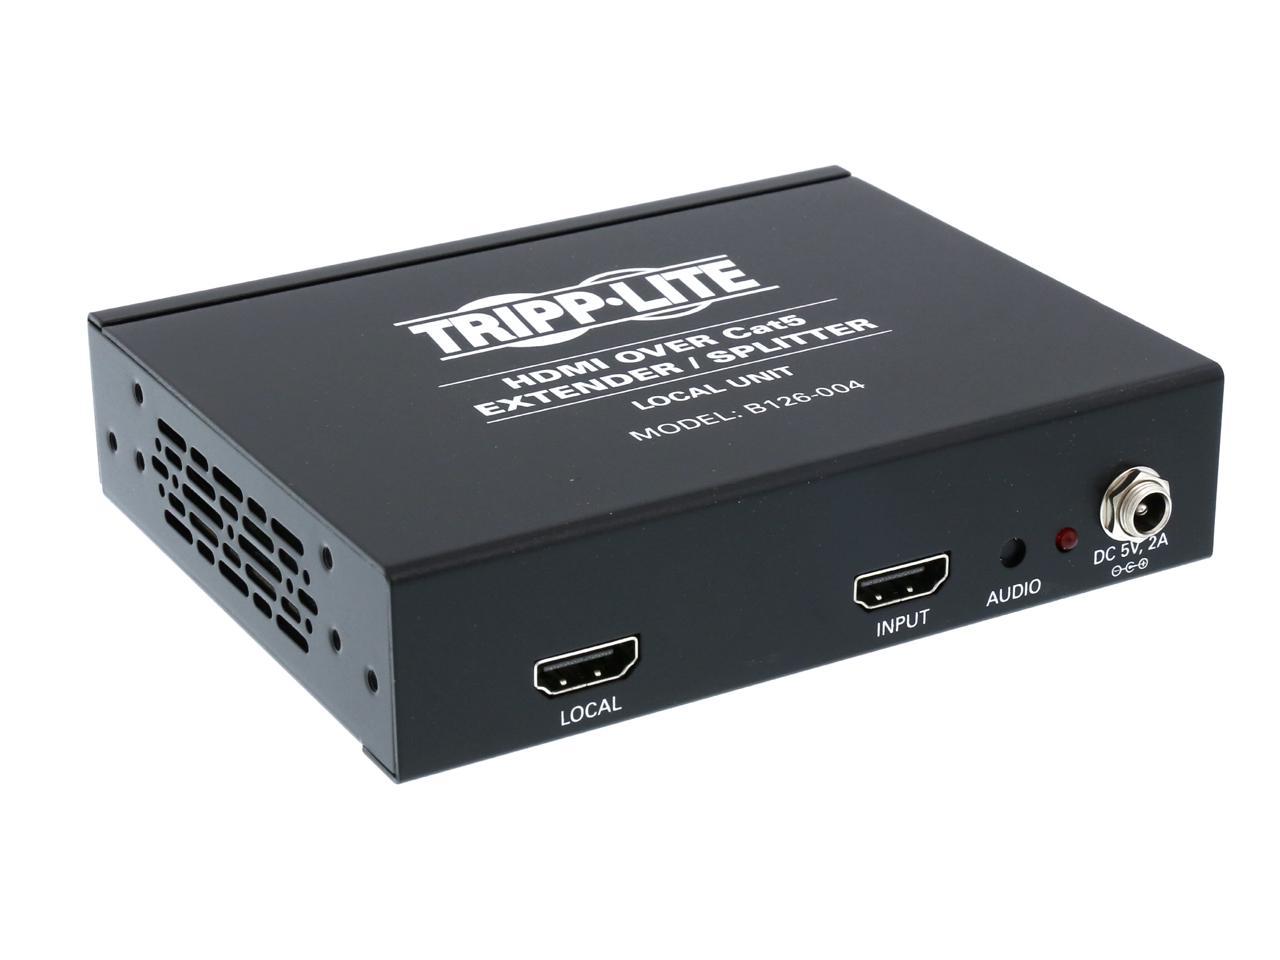 Tripp Lite 4-Port HDMI over Cat5/Cat6 Extender/Splitter, Box-Style  Transmitter for Video and Audio, 1080p @60Hz up to 150-ft., TAA